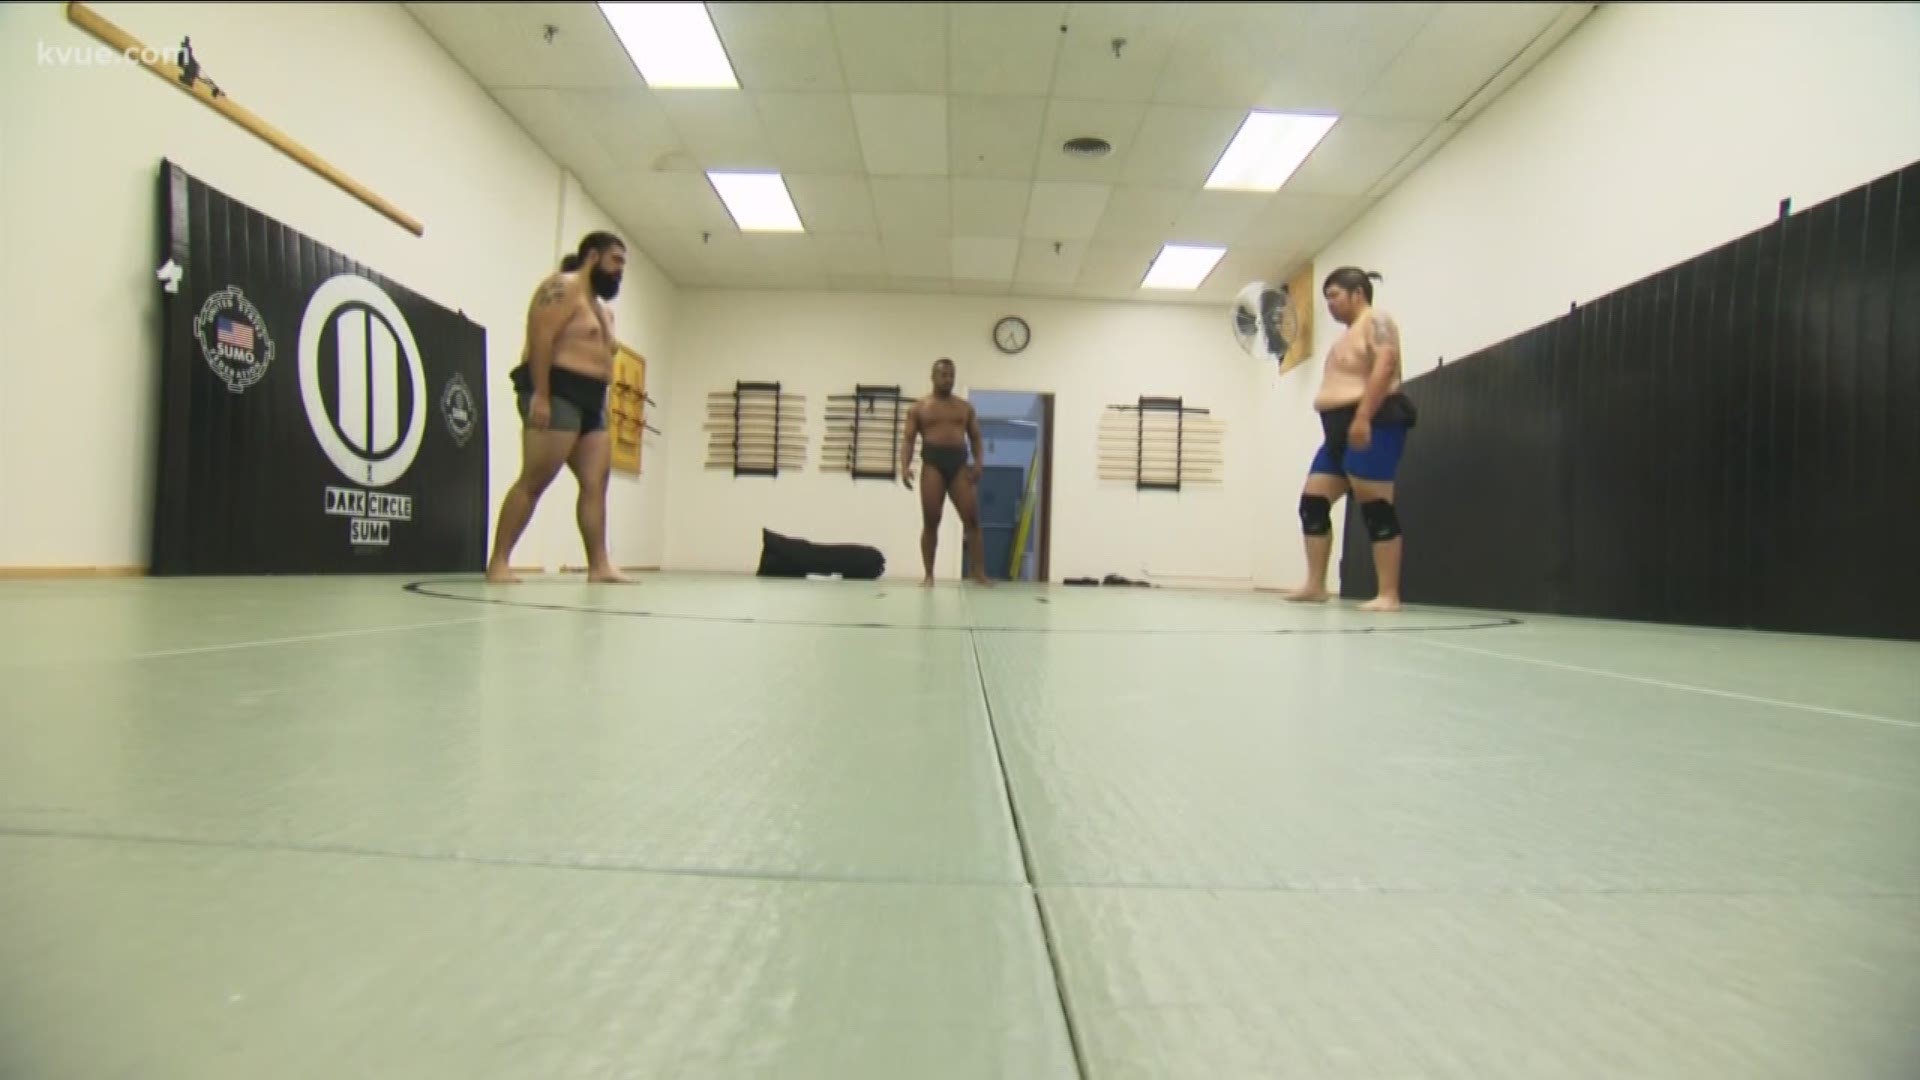 It's a centuries-old sport – and it's making a comeback. Now a group of Austinites wants to get more people in on the sumo trend.